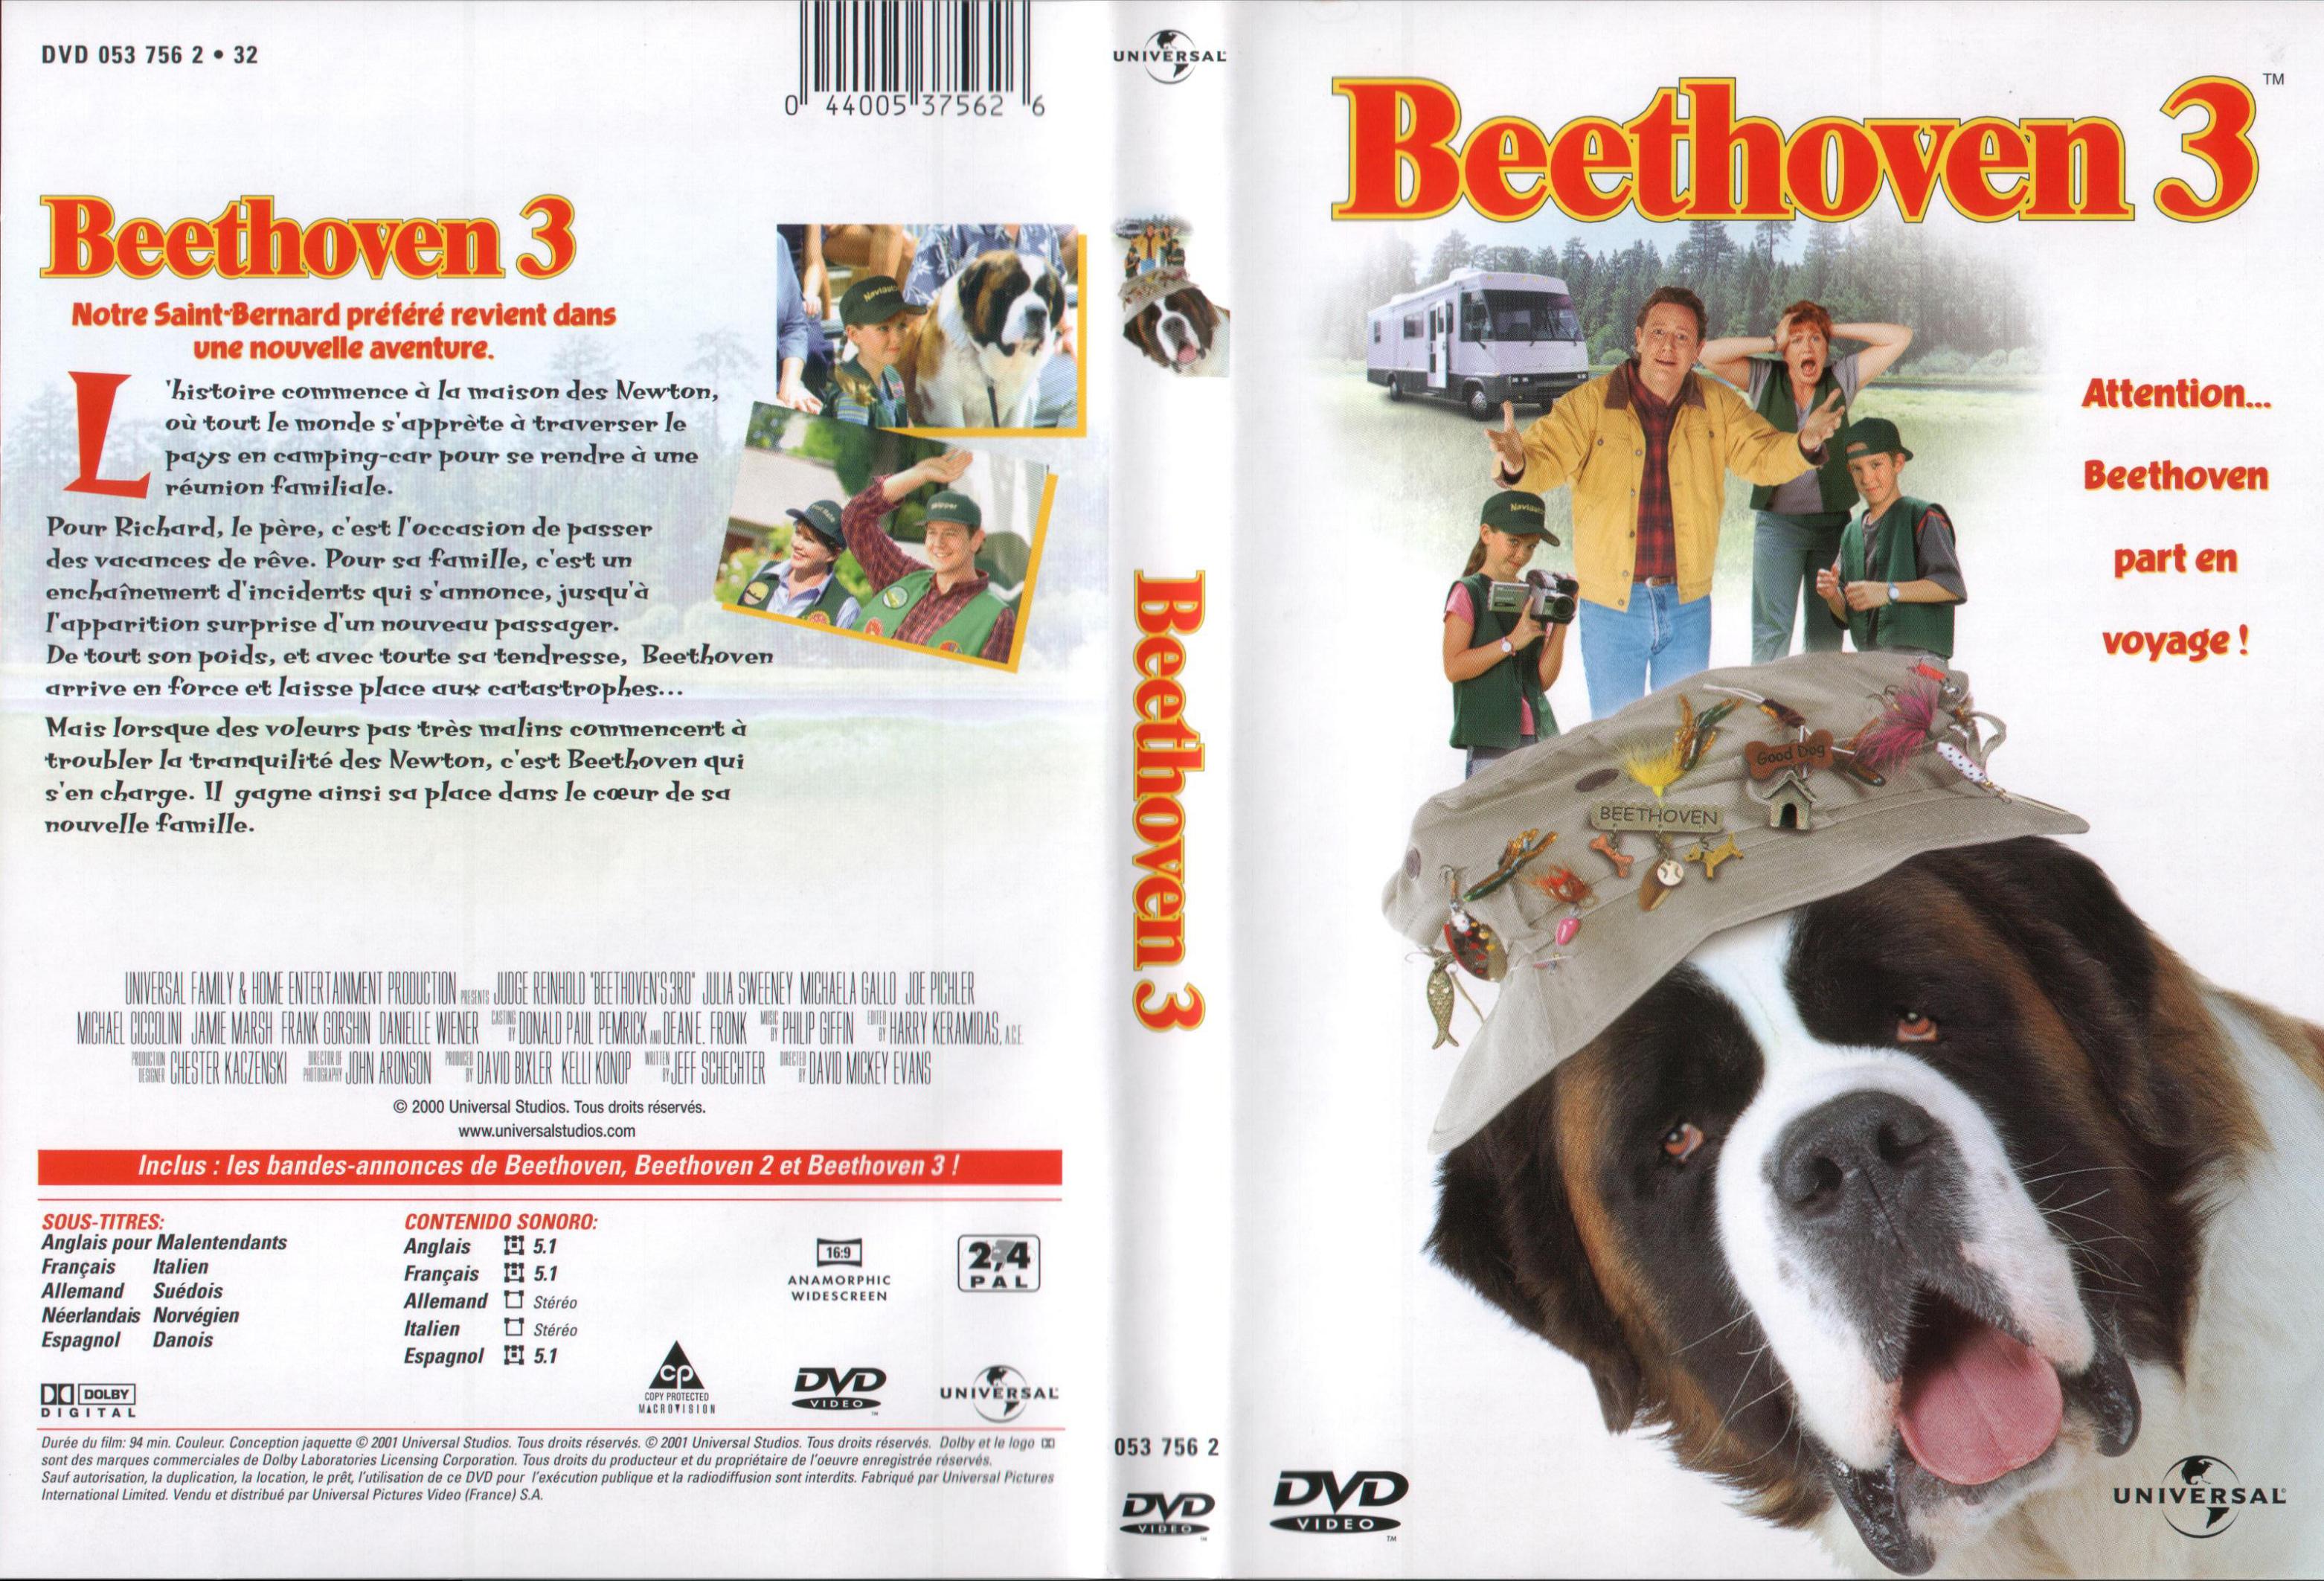 Jaquette DVD Beethoven 3